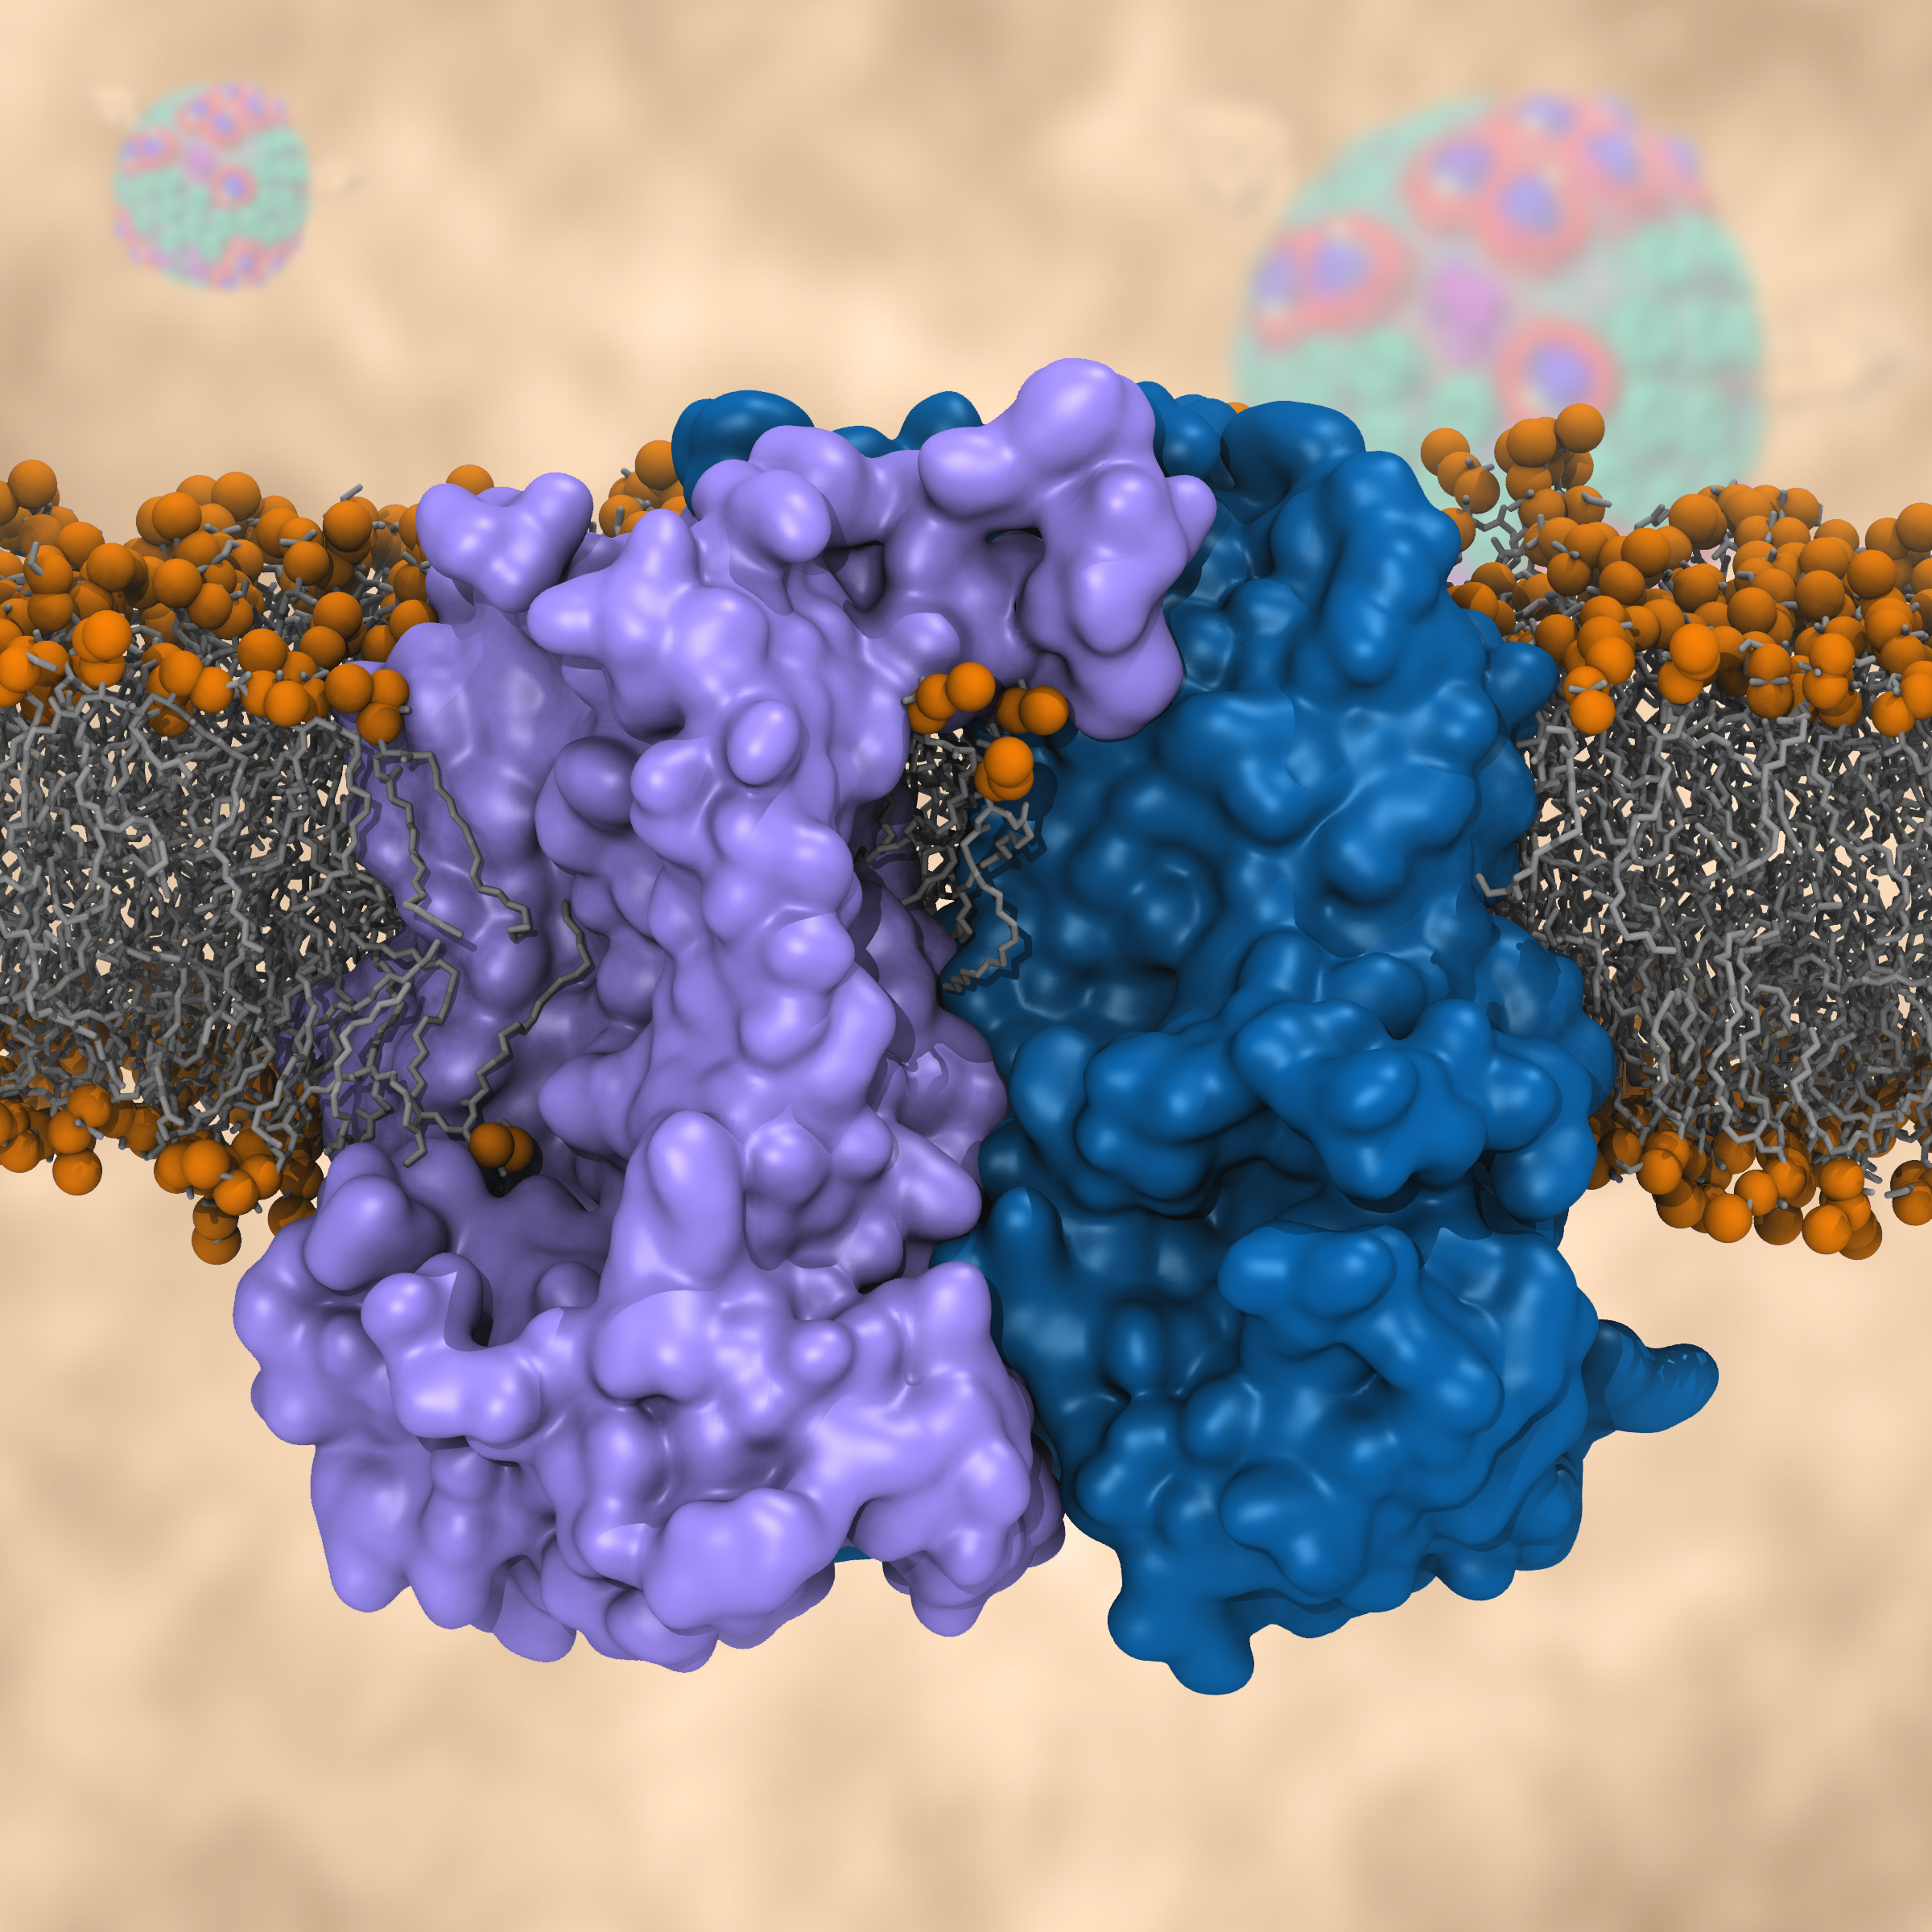 bc1 complex embedded in membrane